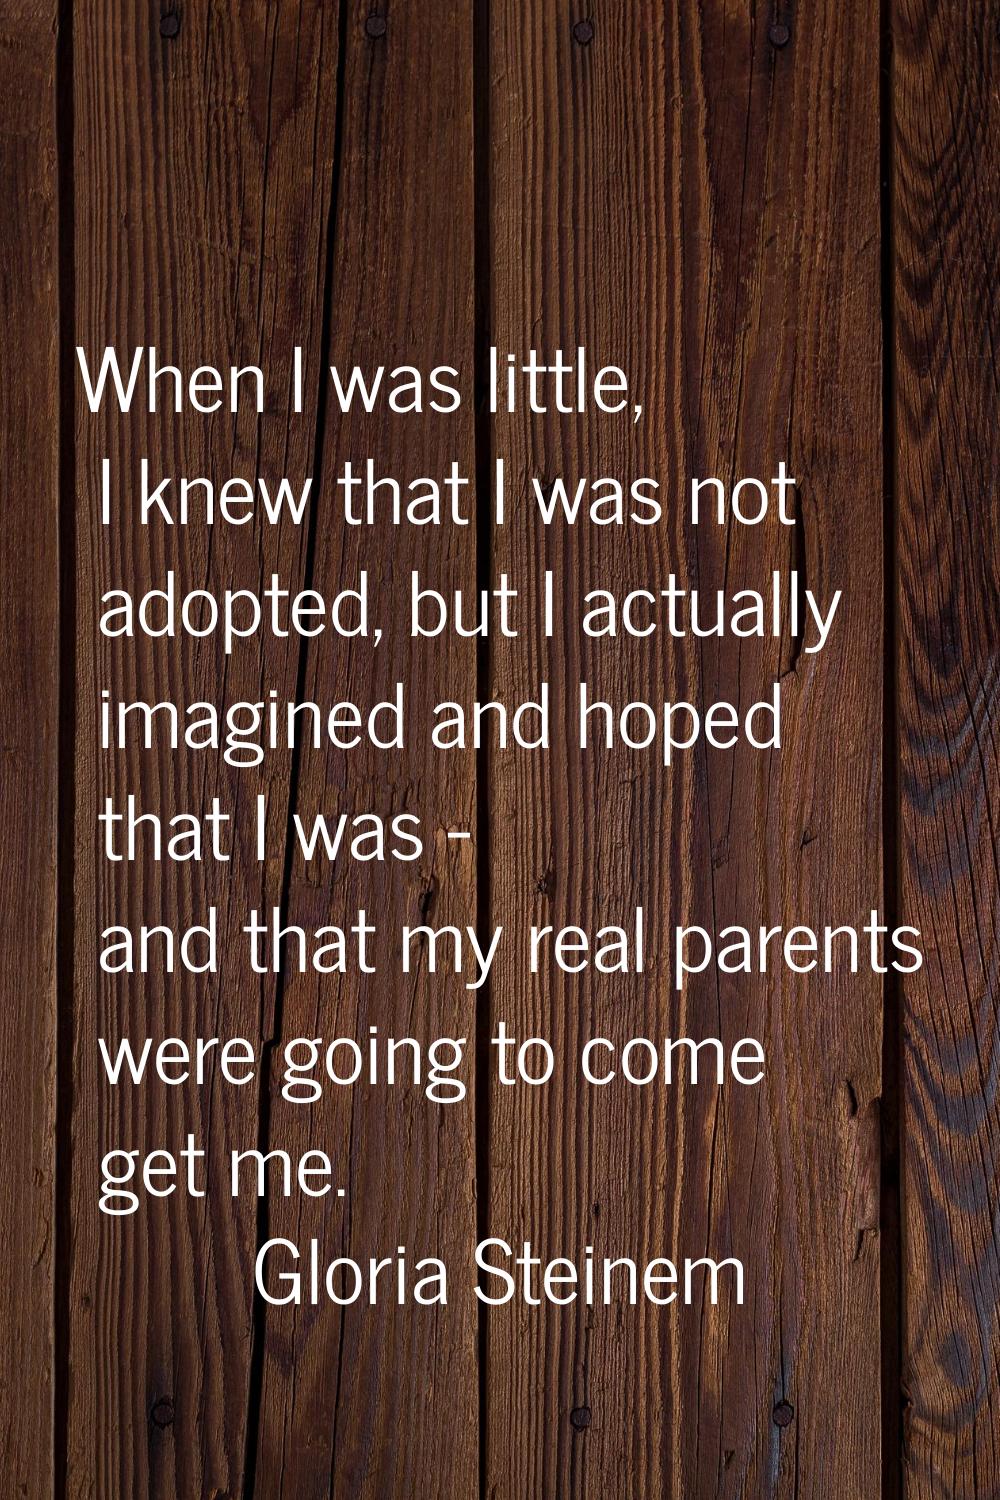 When I was little, I knew that I was not adopted, but I actually imagined and hoped that I was - an